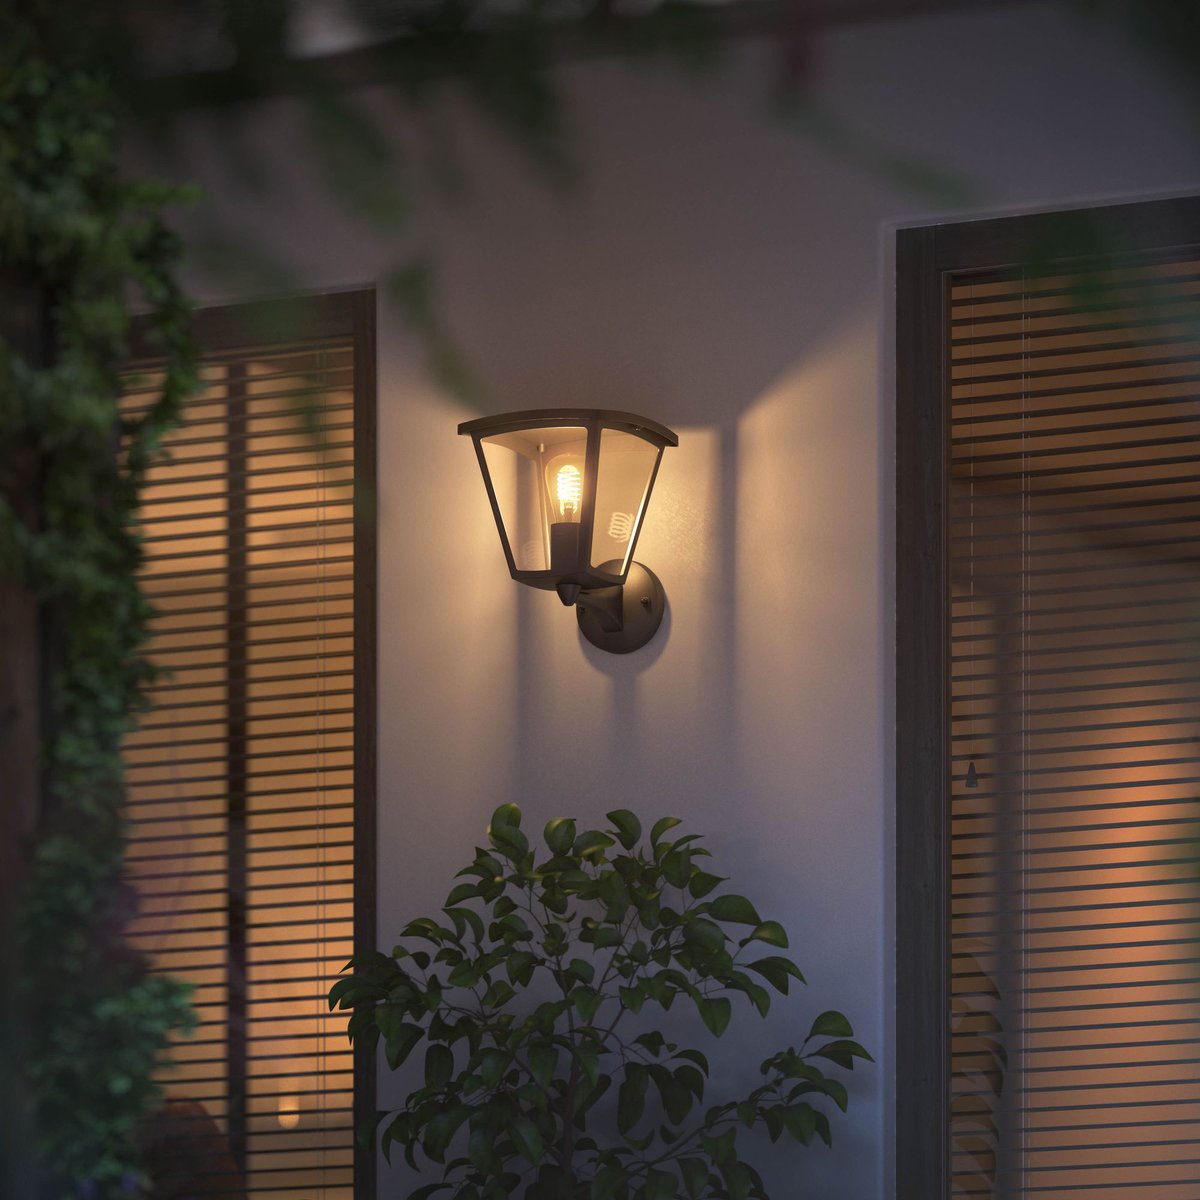 Philips Hue outdoor lights add an old-timey vibe to your smart home